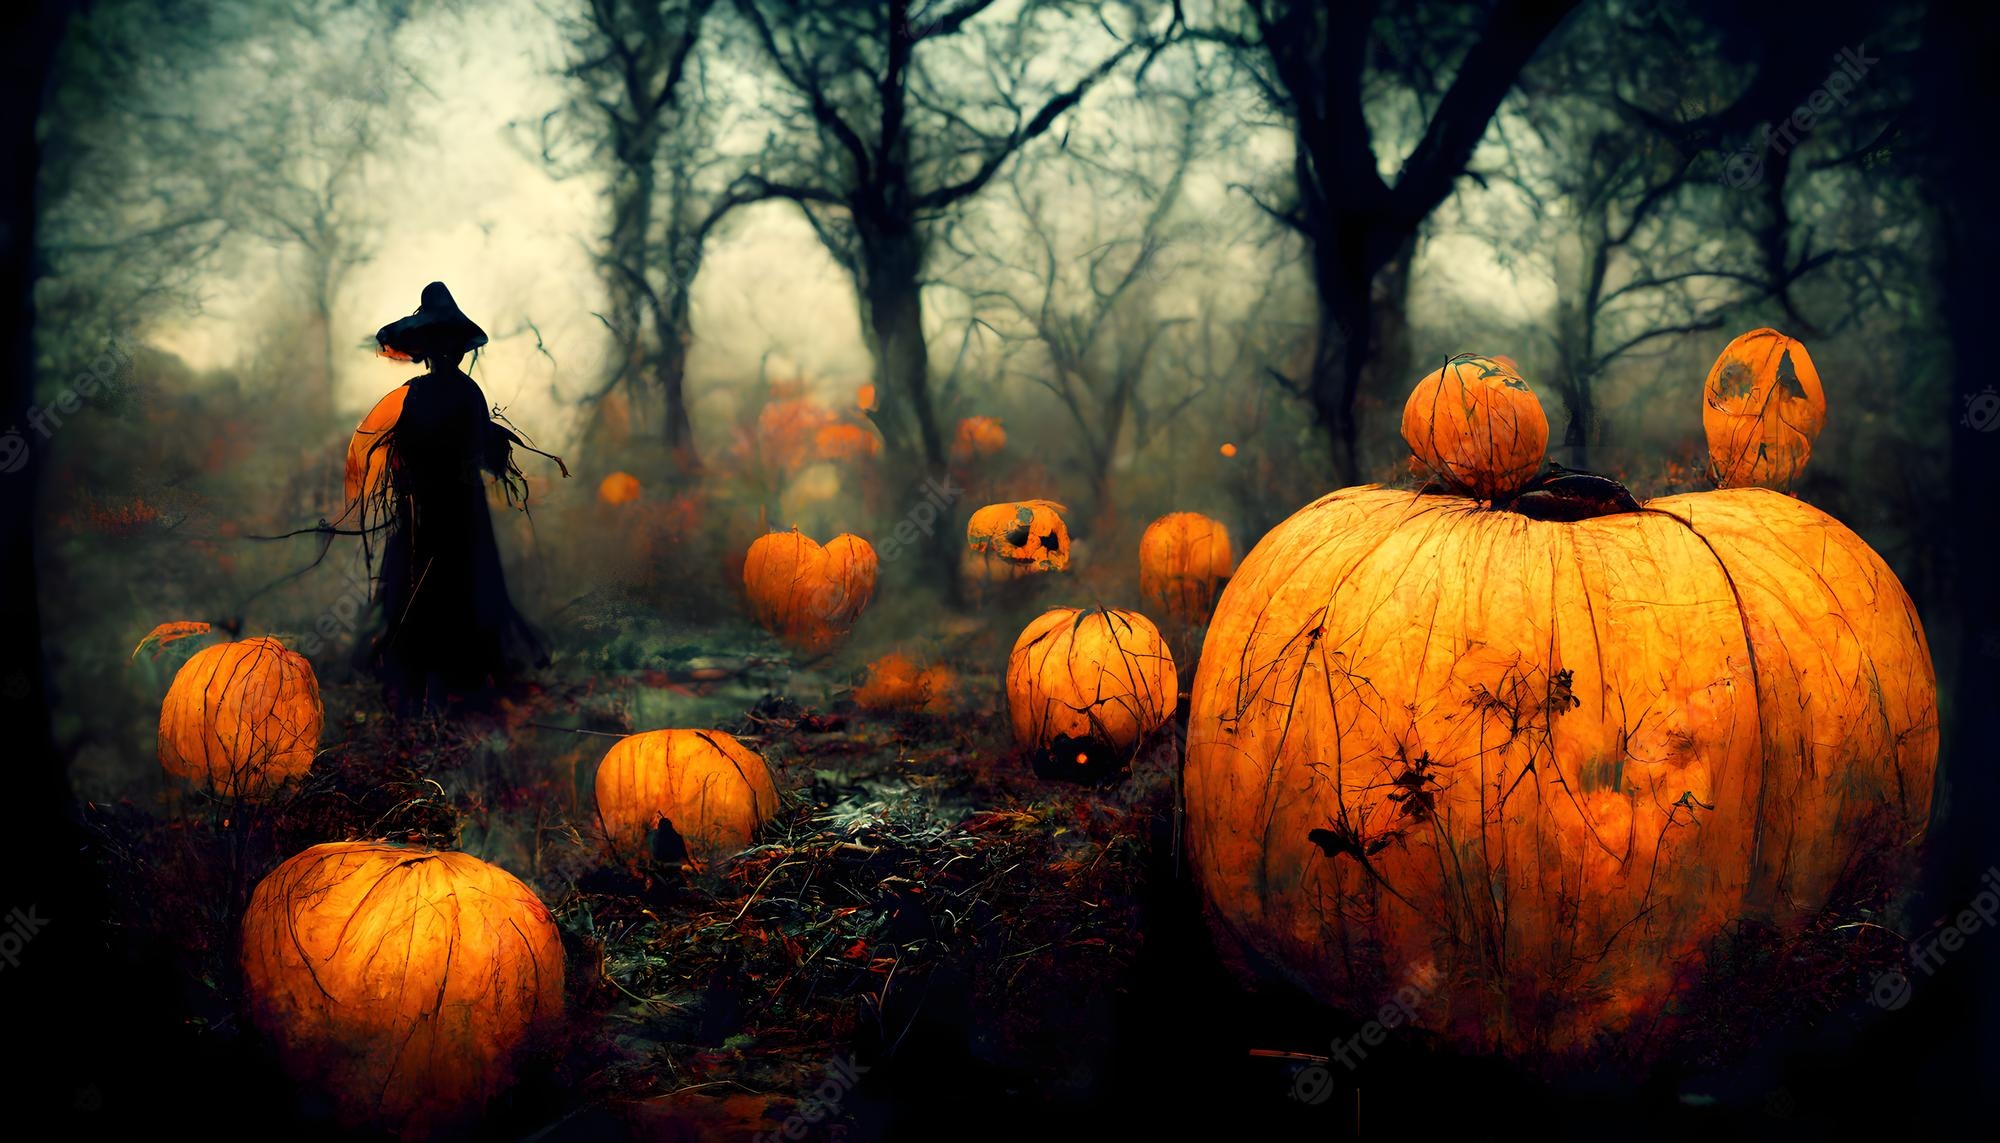 Spooky Forest Wallpaper Image. Free Vectors, & PSD